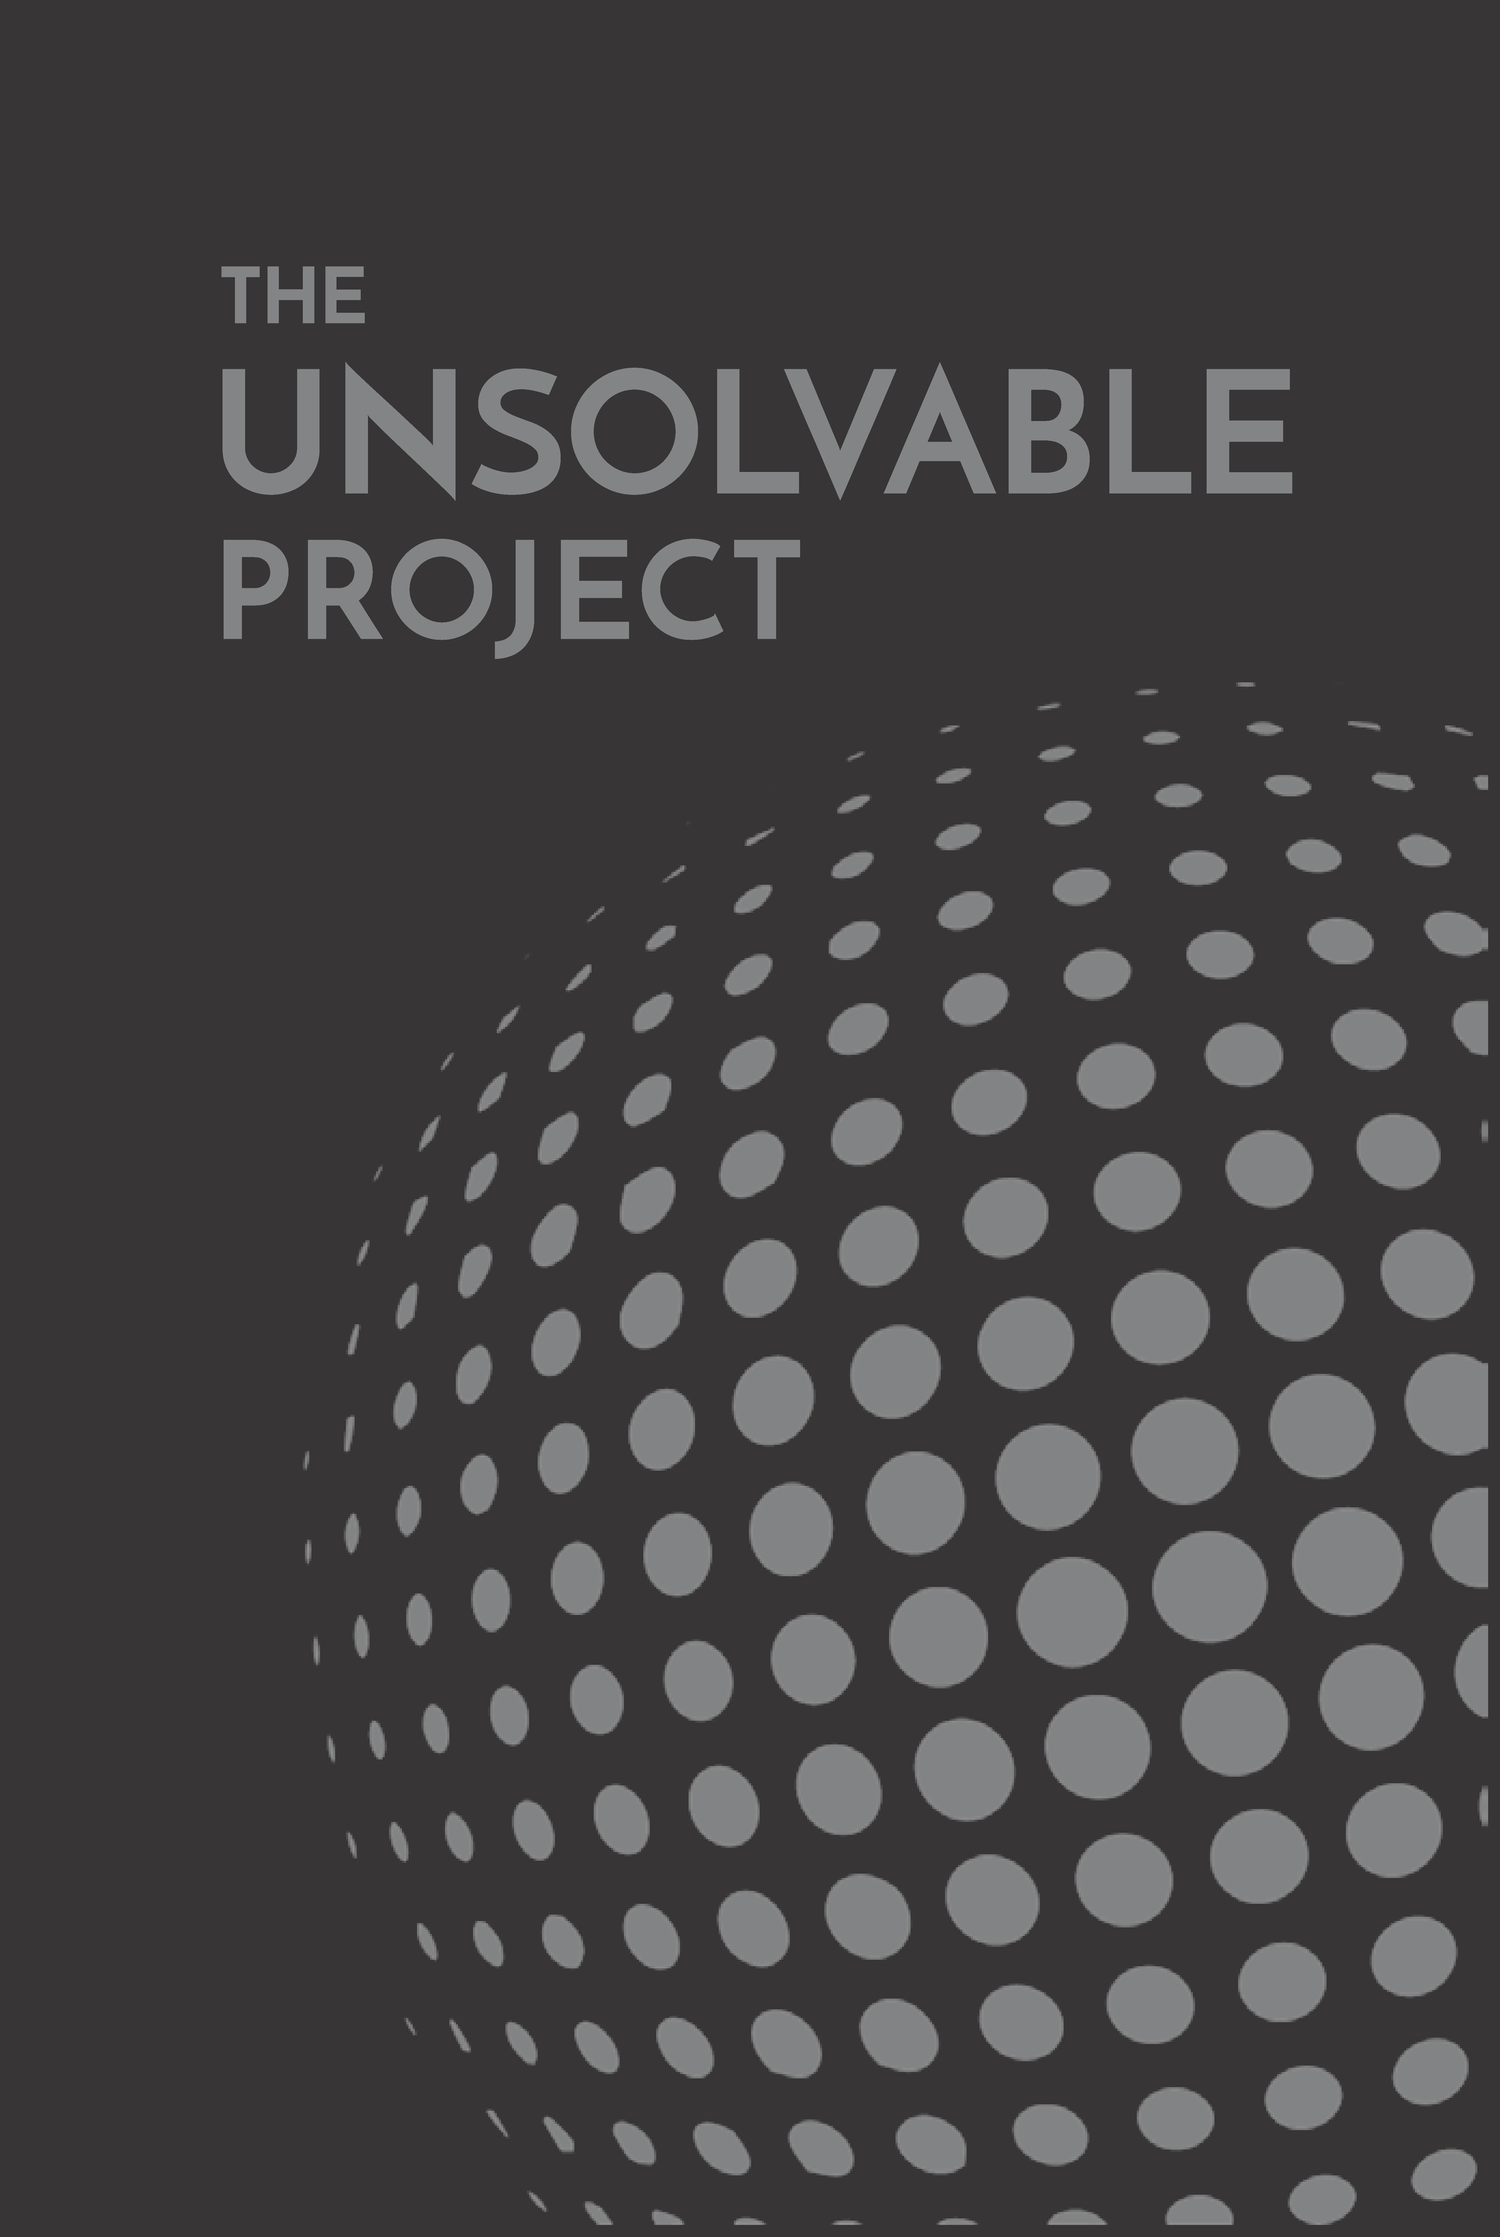 The Unsolvable Project